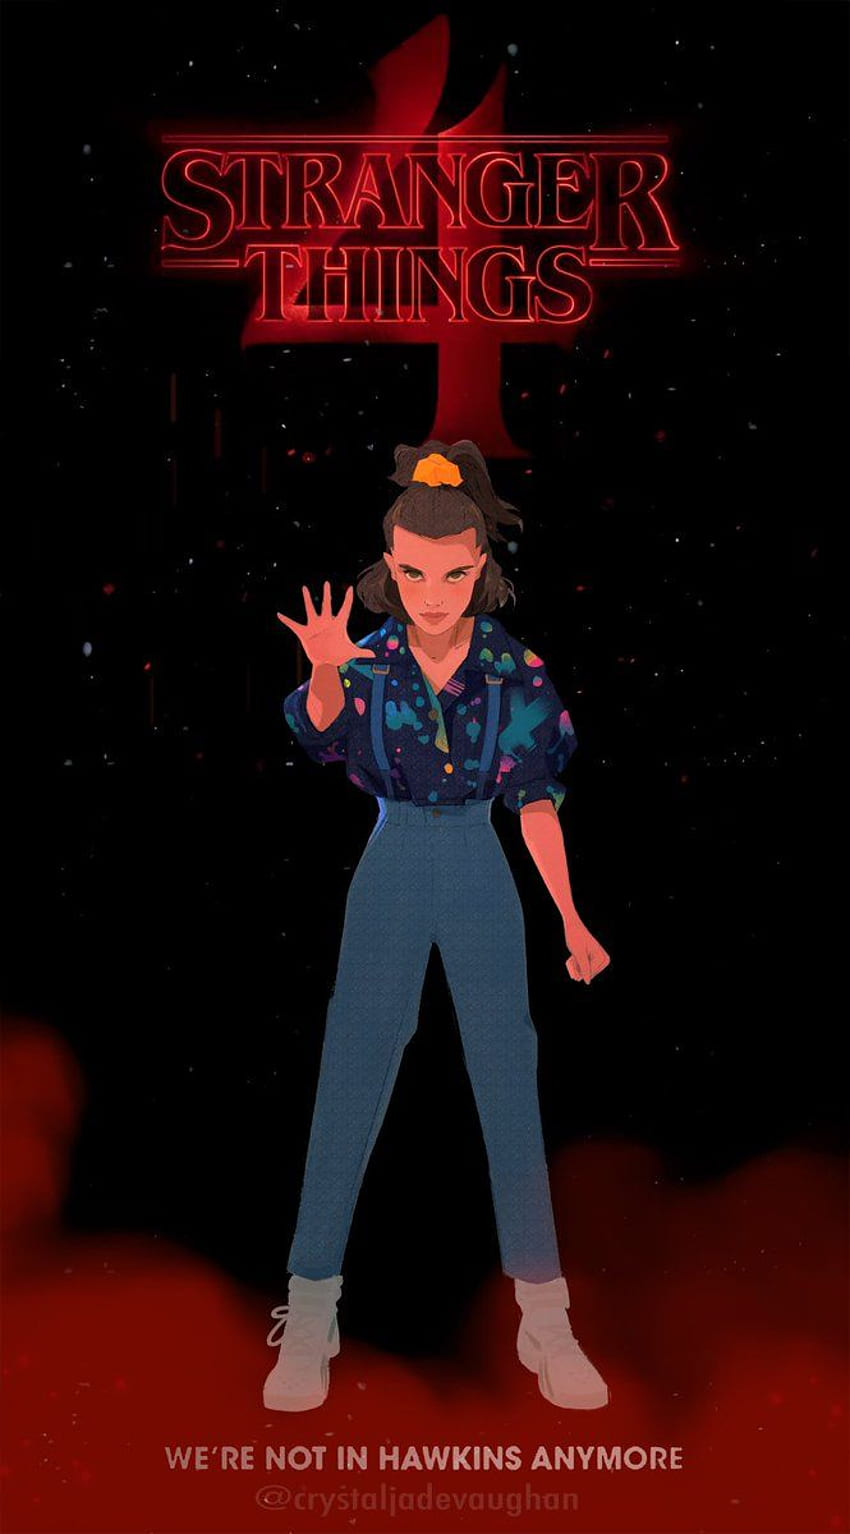 Stranger Things Wallpaper Lock Screen APK for Android Download